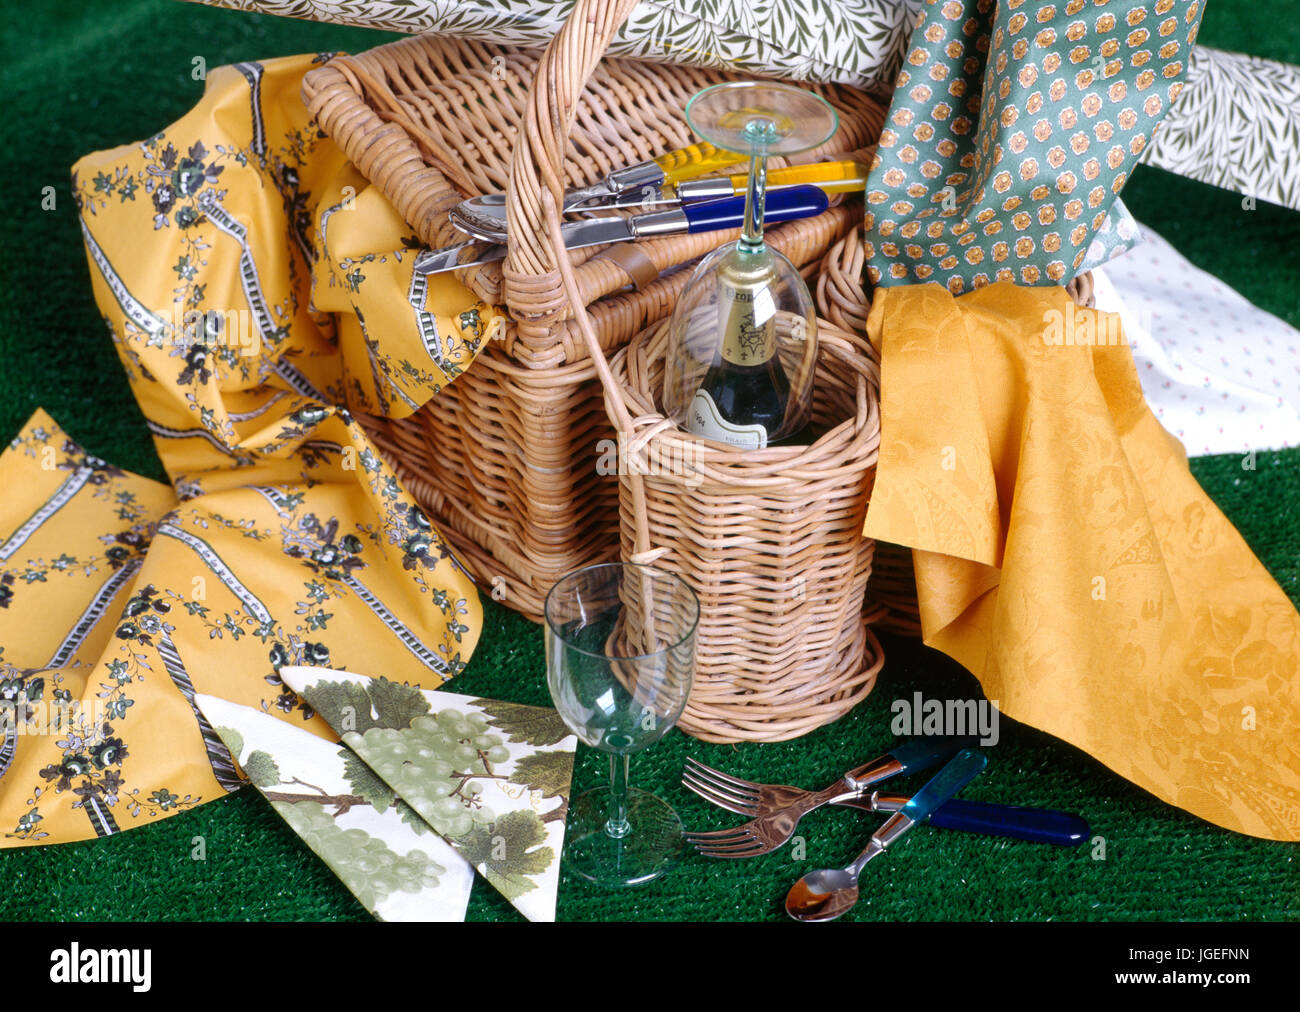 Picnic basket with wine bottle and glasses Stock Photo